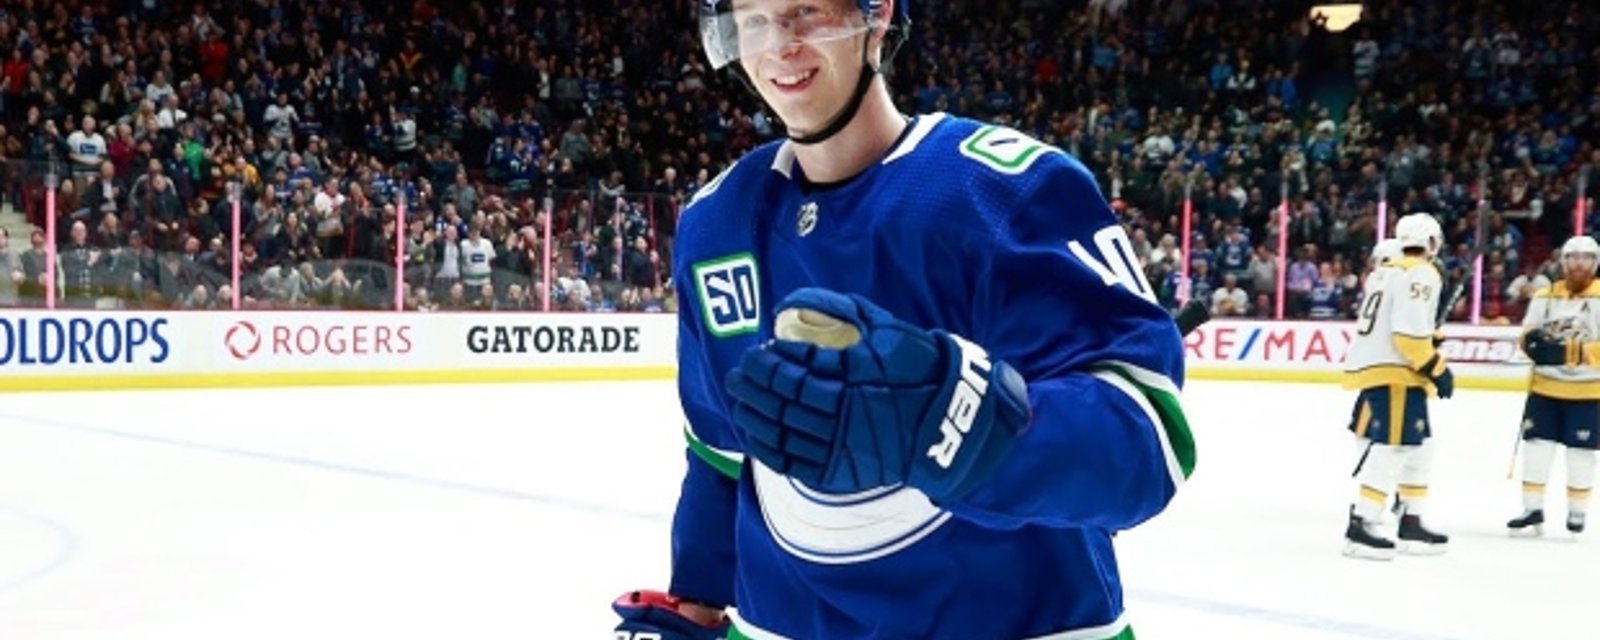 Pettersson’s next deal could reach over $10 million per season but the Canucks have yet to speak with him 